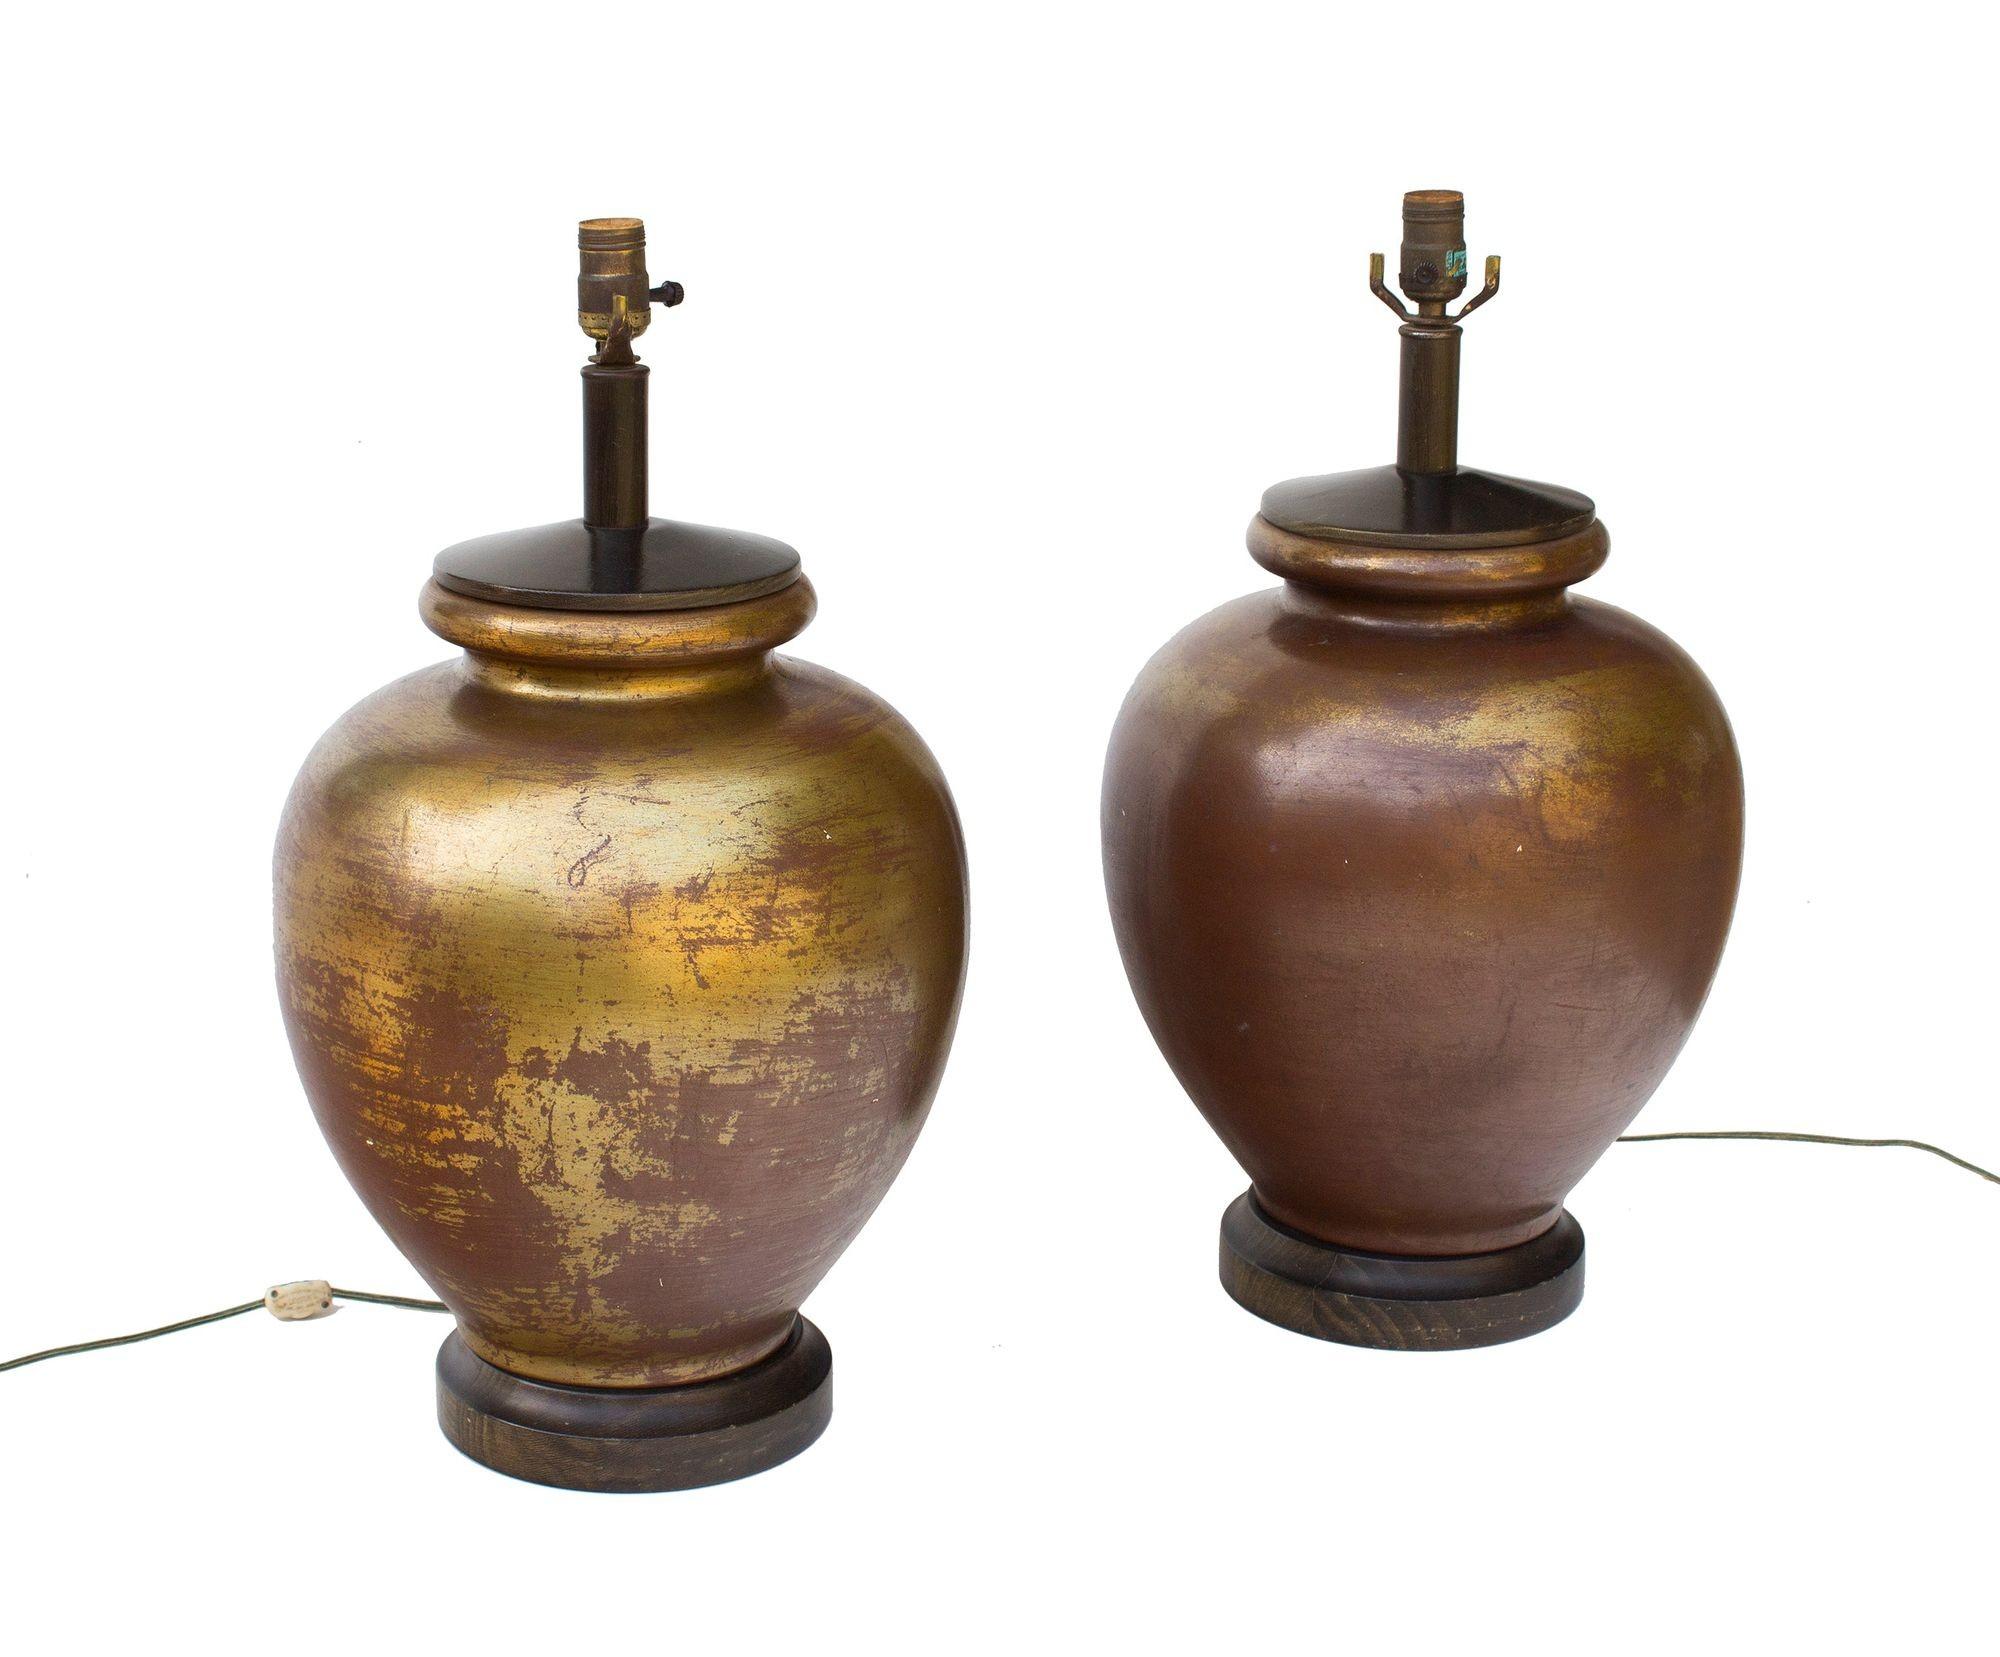 USA, 1960s
Large pair of golden ceramic table lamps. These have wenge-finished wooden fittings at both the top and bottom of the ceramic form. The lamp bodies have a varied glaze that goes from a deep, rich bronze to a golden finish- I believe it